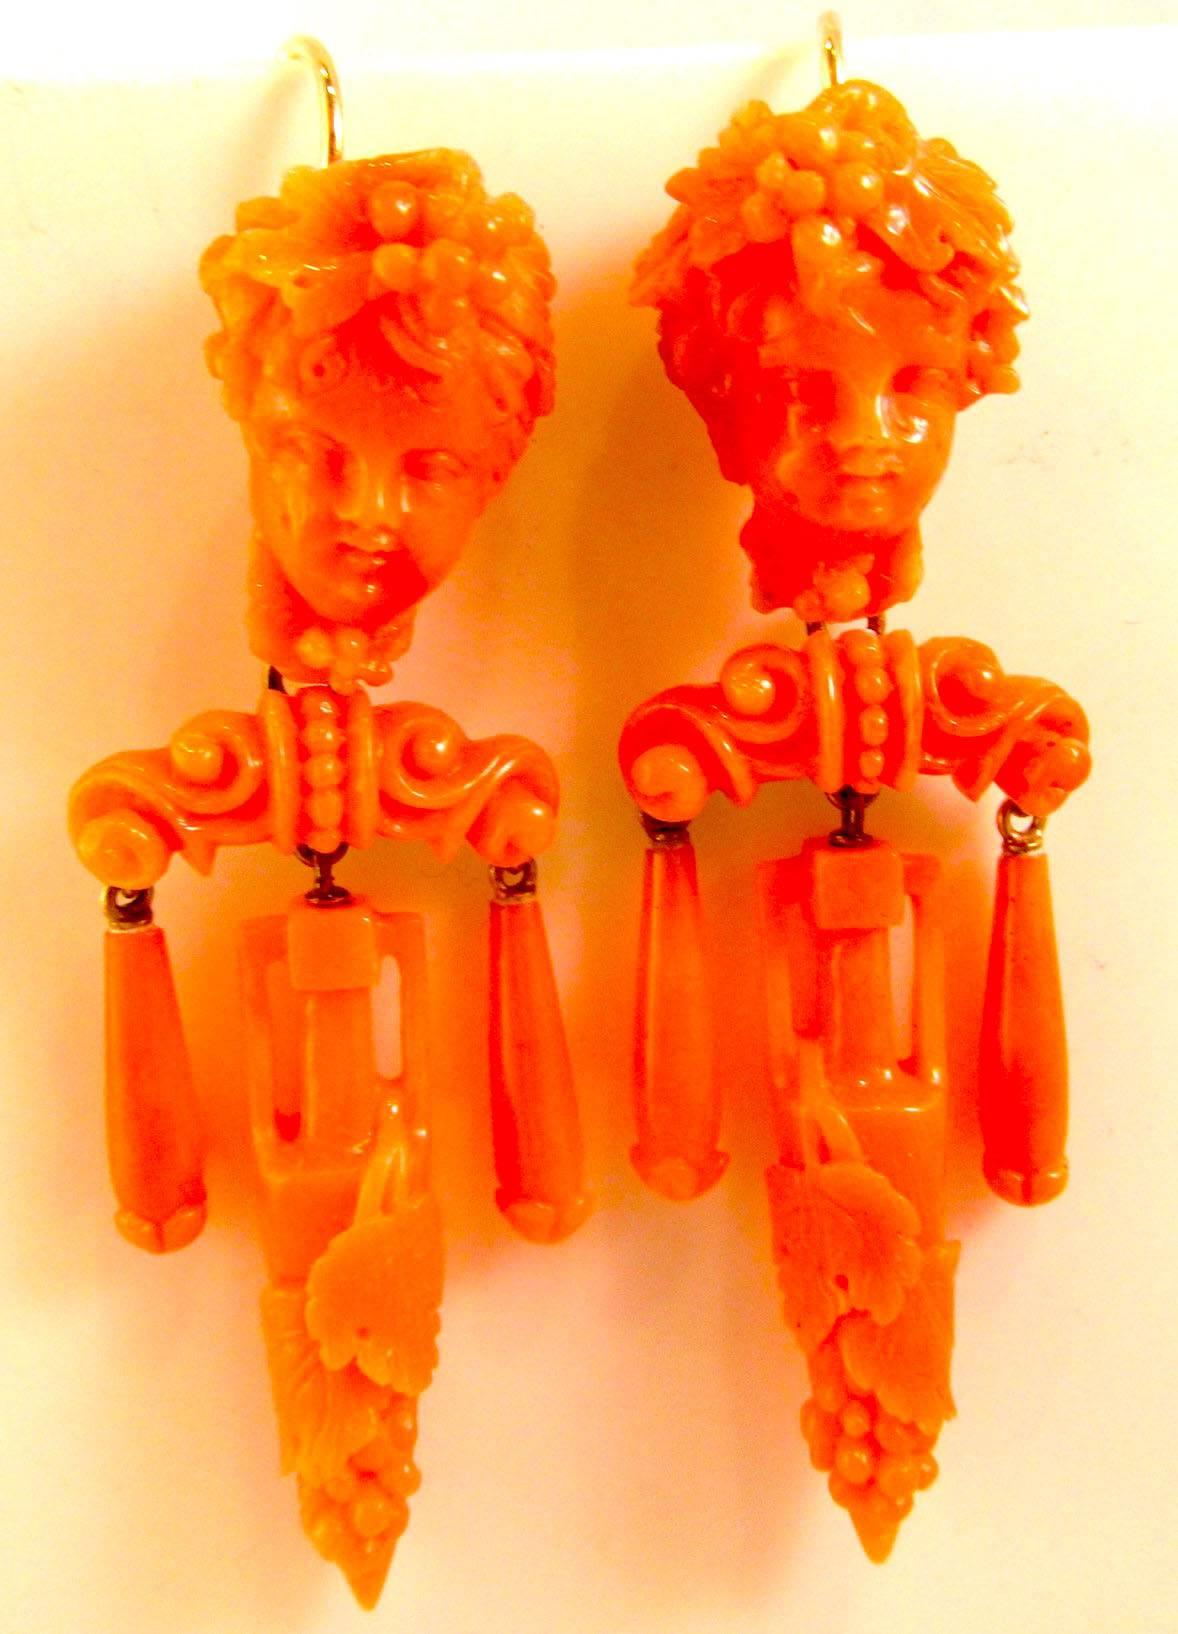 Victorian coral cameo earrings with girandole drops, the longest having a grape motif, set in 15K gold. The cameos are of cherubs with grape vines in their hair. The wonderful deep coral color will enhance any wardrobe. The earrings measure 2 1/2